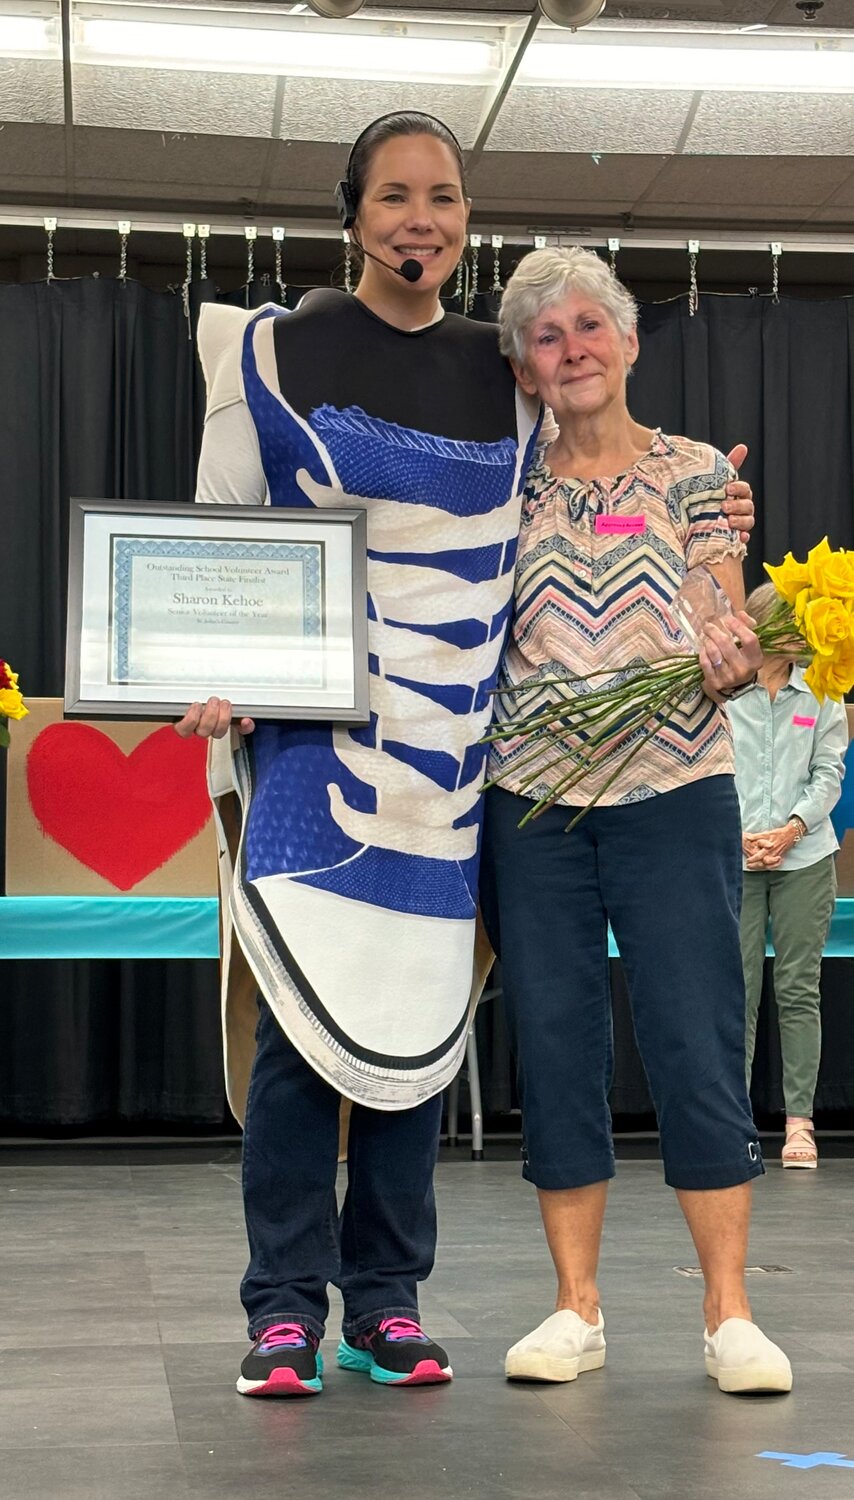 Ocean Palms Elementary School Principal Tiffany Cantwell recognizes Sharon Kehoe for her service and state recognition at the school’s Otter Run pep rally.